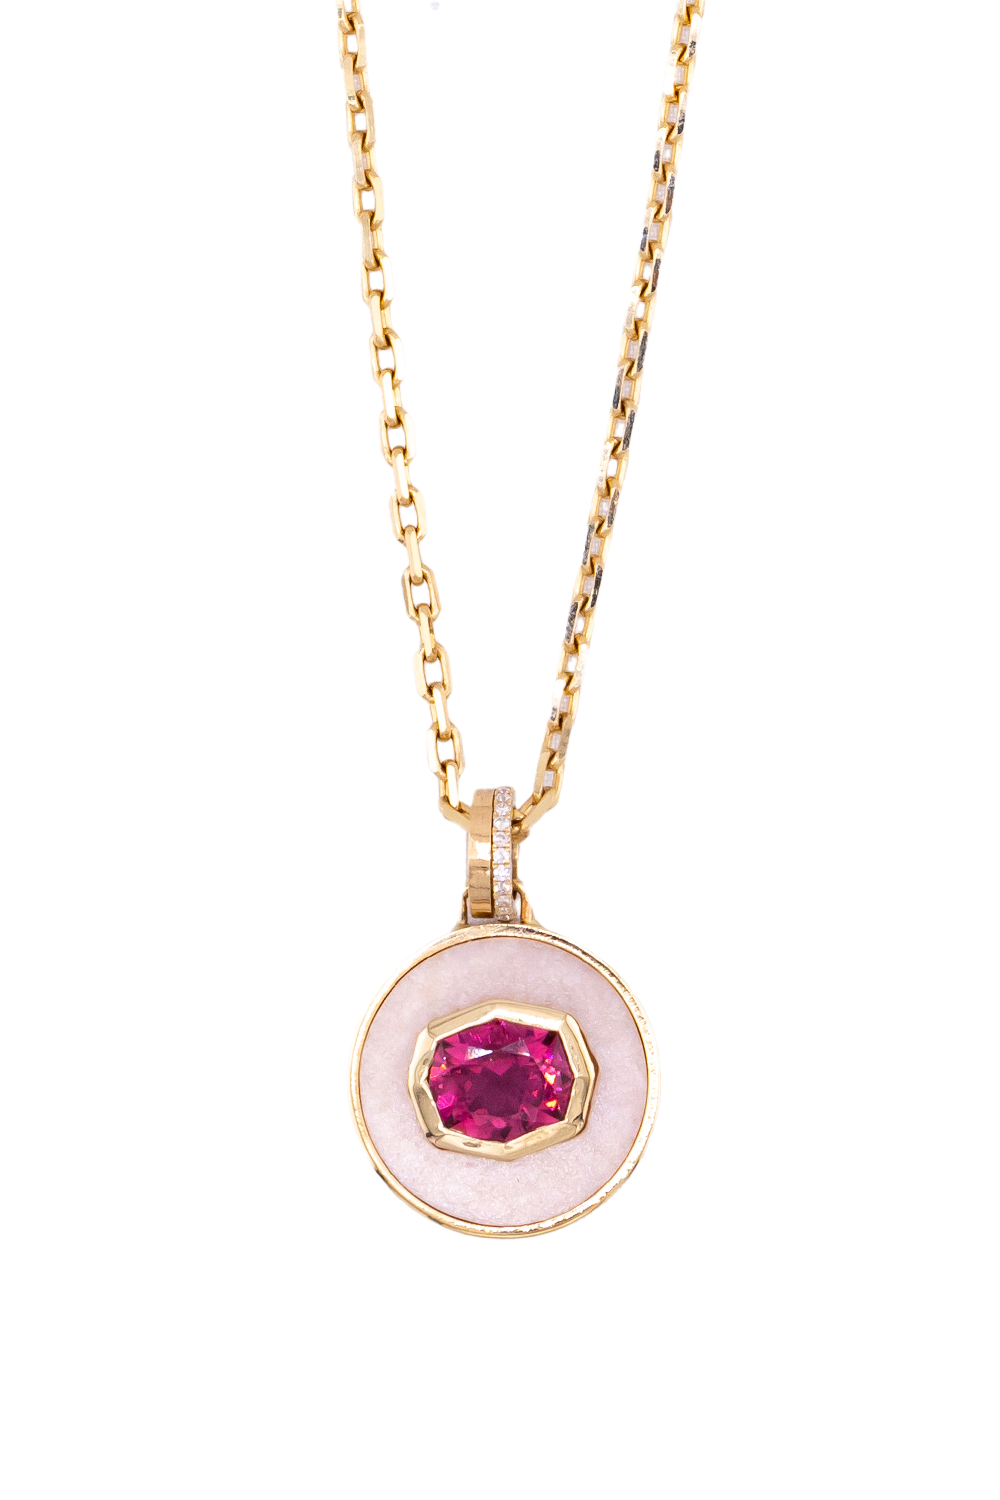 Bejeweled OOK Necklace Pink Opal/Tourmaline